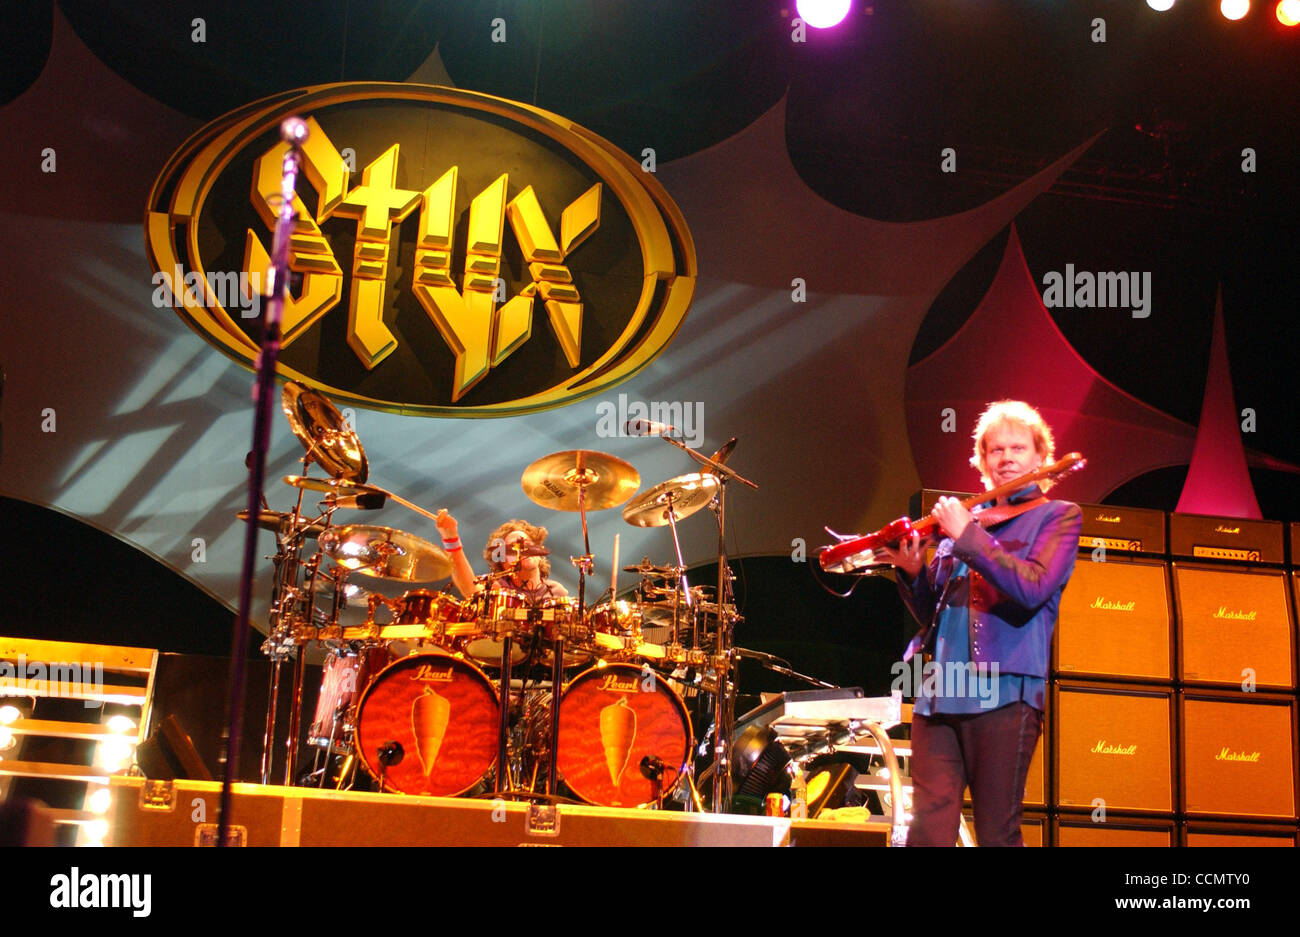 Jun 27, 2004; Virginia Beach, VA, USA;   Call for Price! The rock band 'Styx' performing live at the Virginia Beach Amphtheater in Virginia Beach. Mandatory Credit: Photo by Jeff Moore/ZUMA Press. (©) Copyright 2004 by Jeff Moore Stock Photo